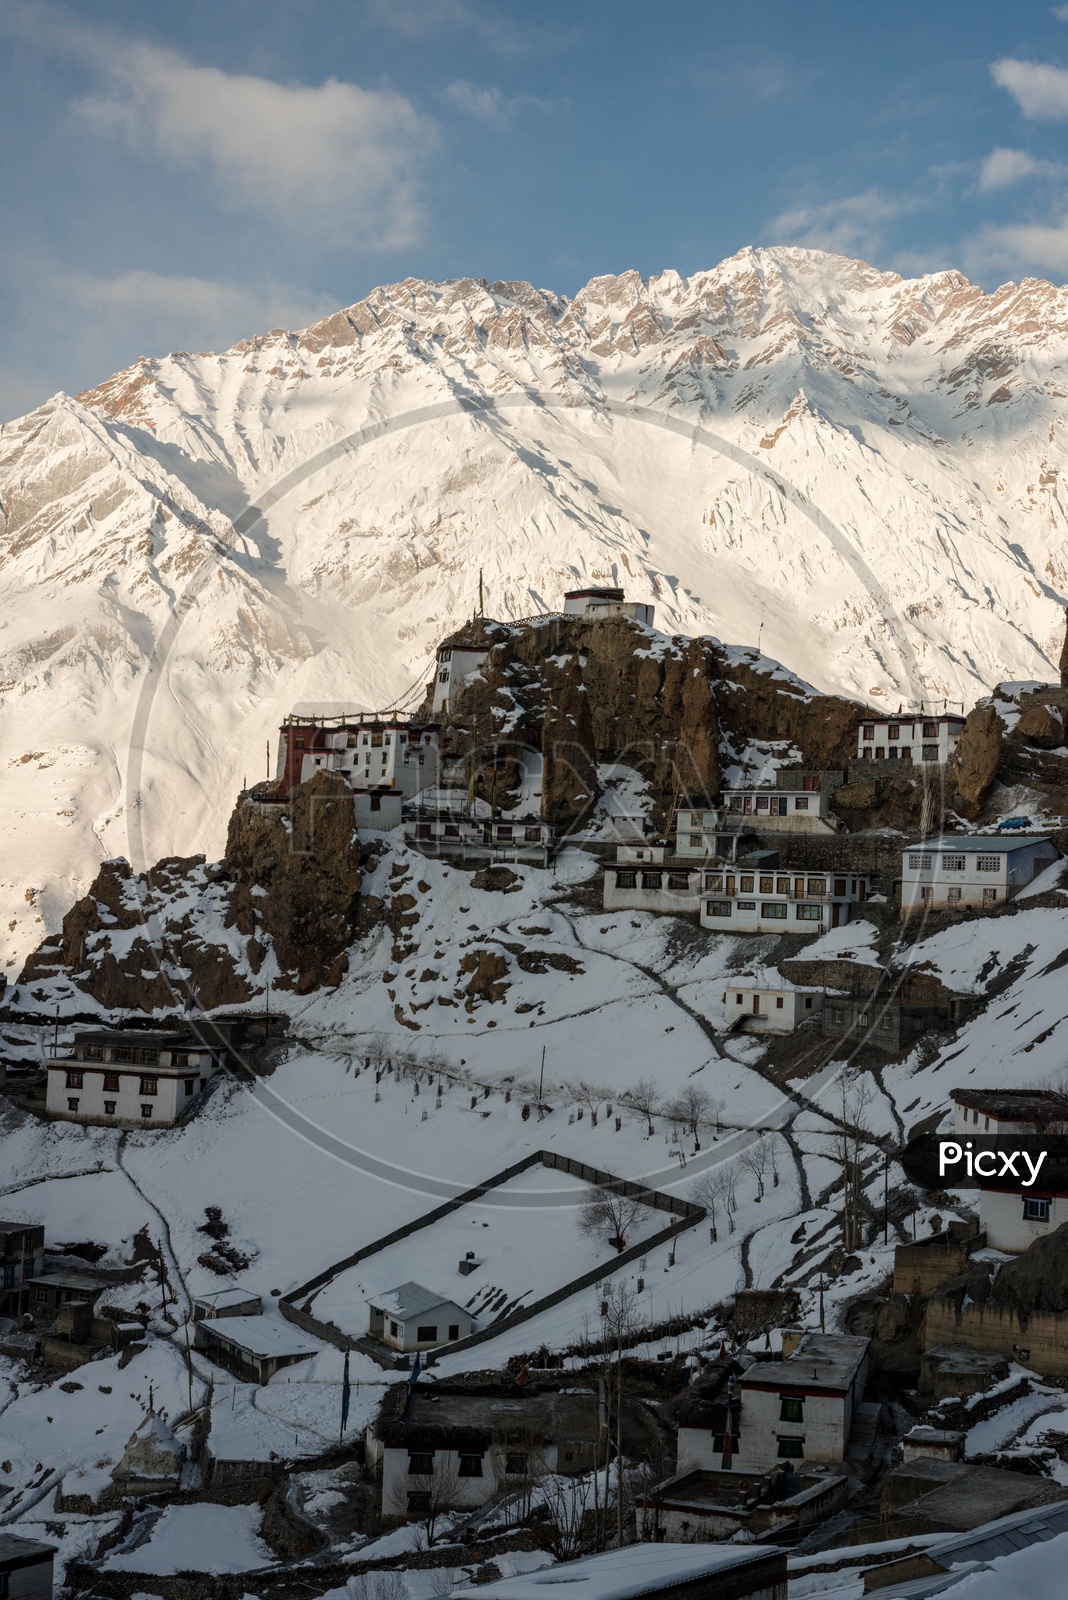 Dhankar Village Covered with Snow in Winter Season